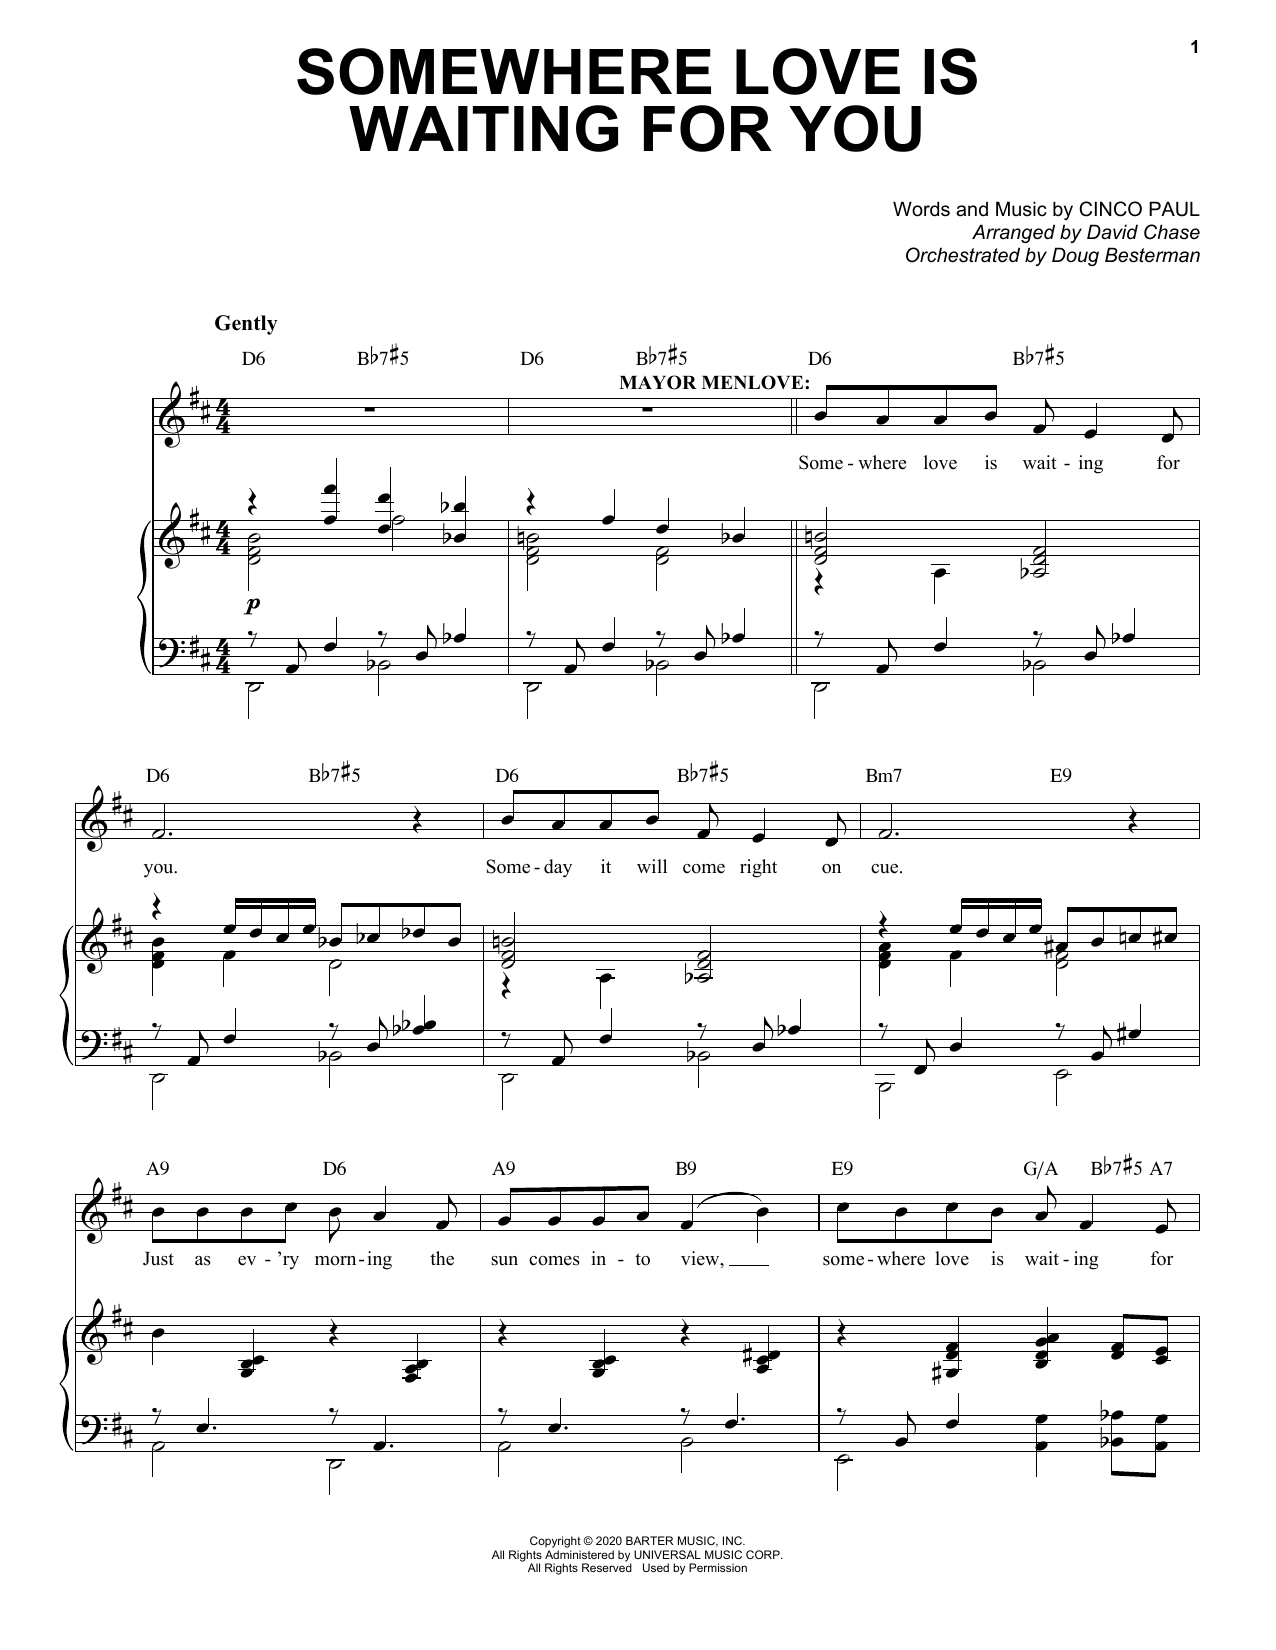 Download Cinco Paul Somewhere Love Is Waiting For You (from Sheet Music